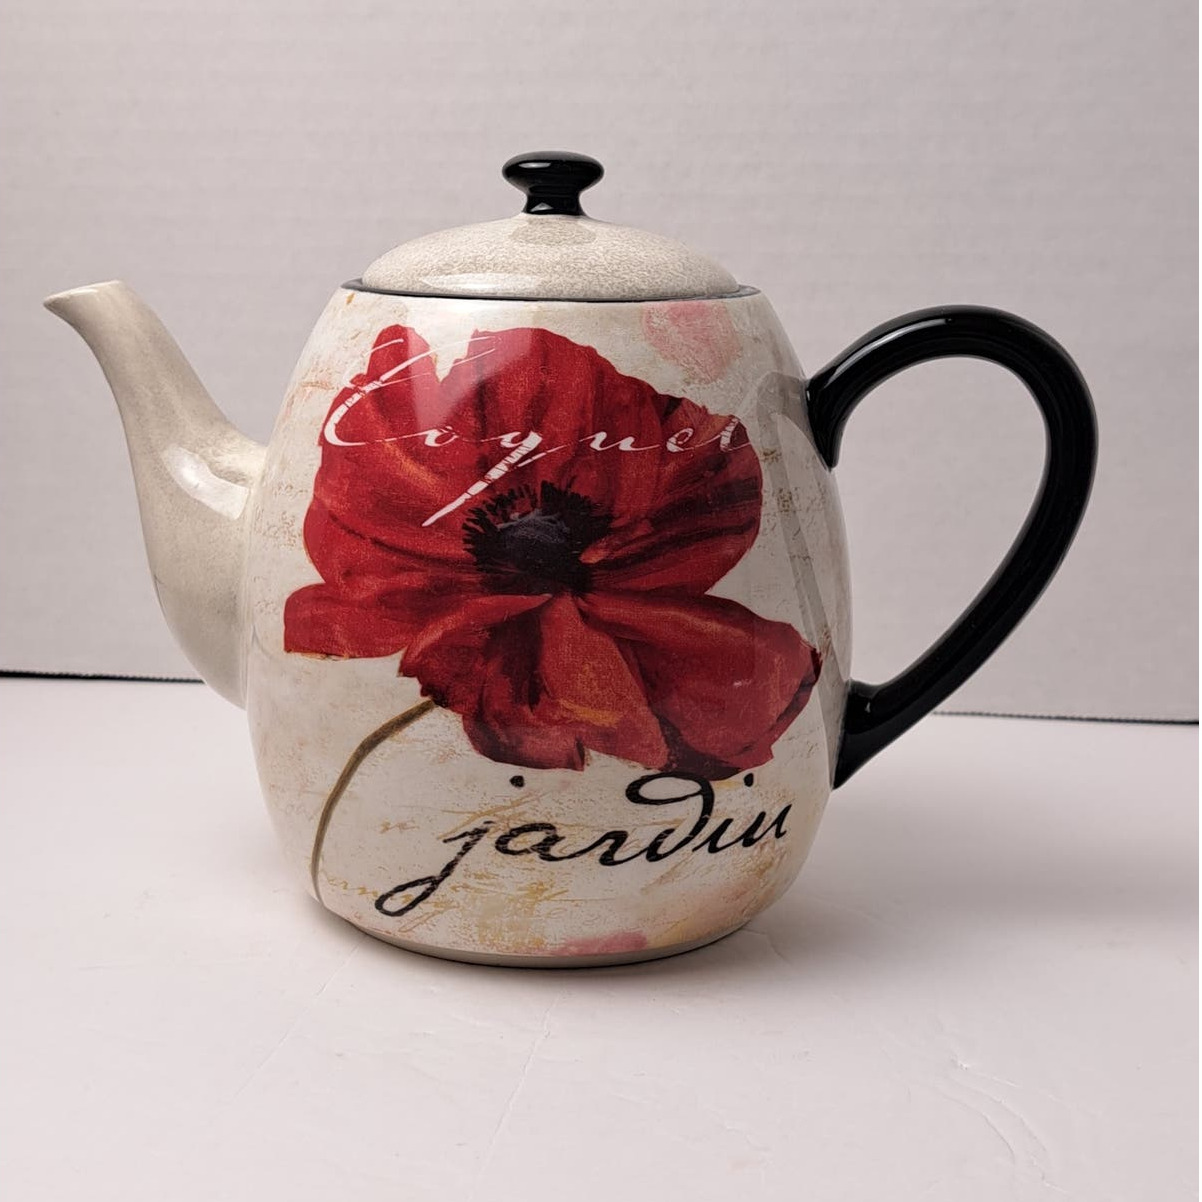 Discontinued Certified International Midnight Poppies Tea Pot 40 OZ Red & White